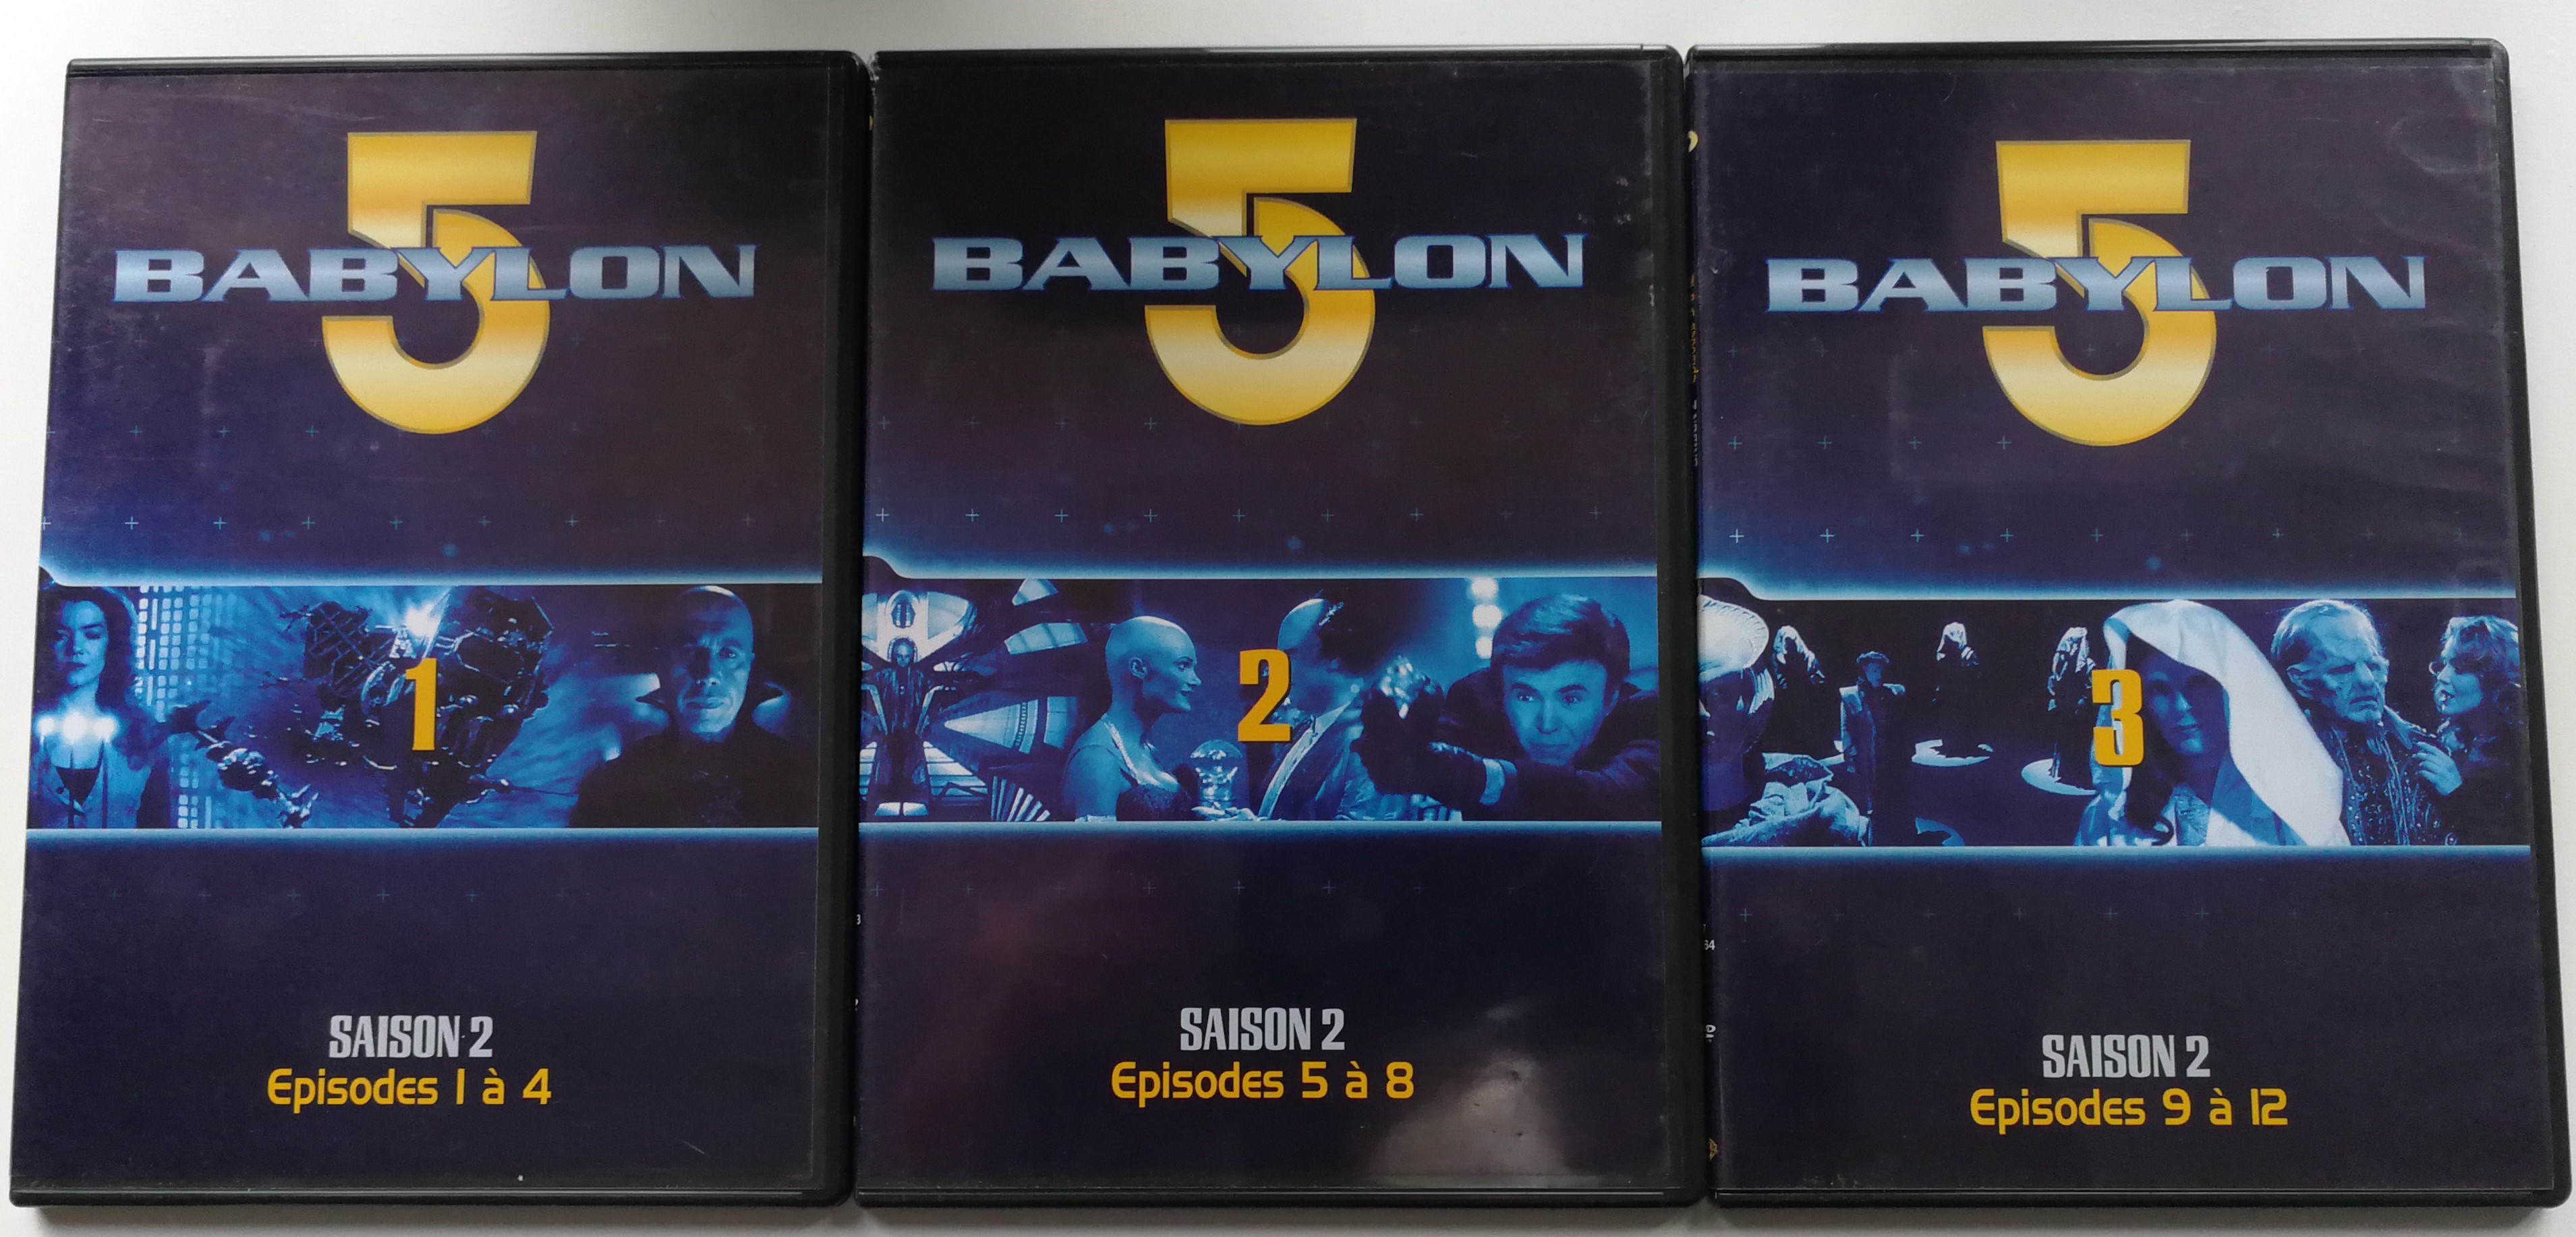 Babylon 5 DVD SET Season 2 / French Release - Episodes 1-12 / Saison 2 -  Episodes 1 á 12 / Created by J. Michael Straczynski / Starring: Bruce  Boxleitner, Michael O'Hare, Claudia Christian, Jerry Doyle - Bible in My  Language